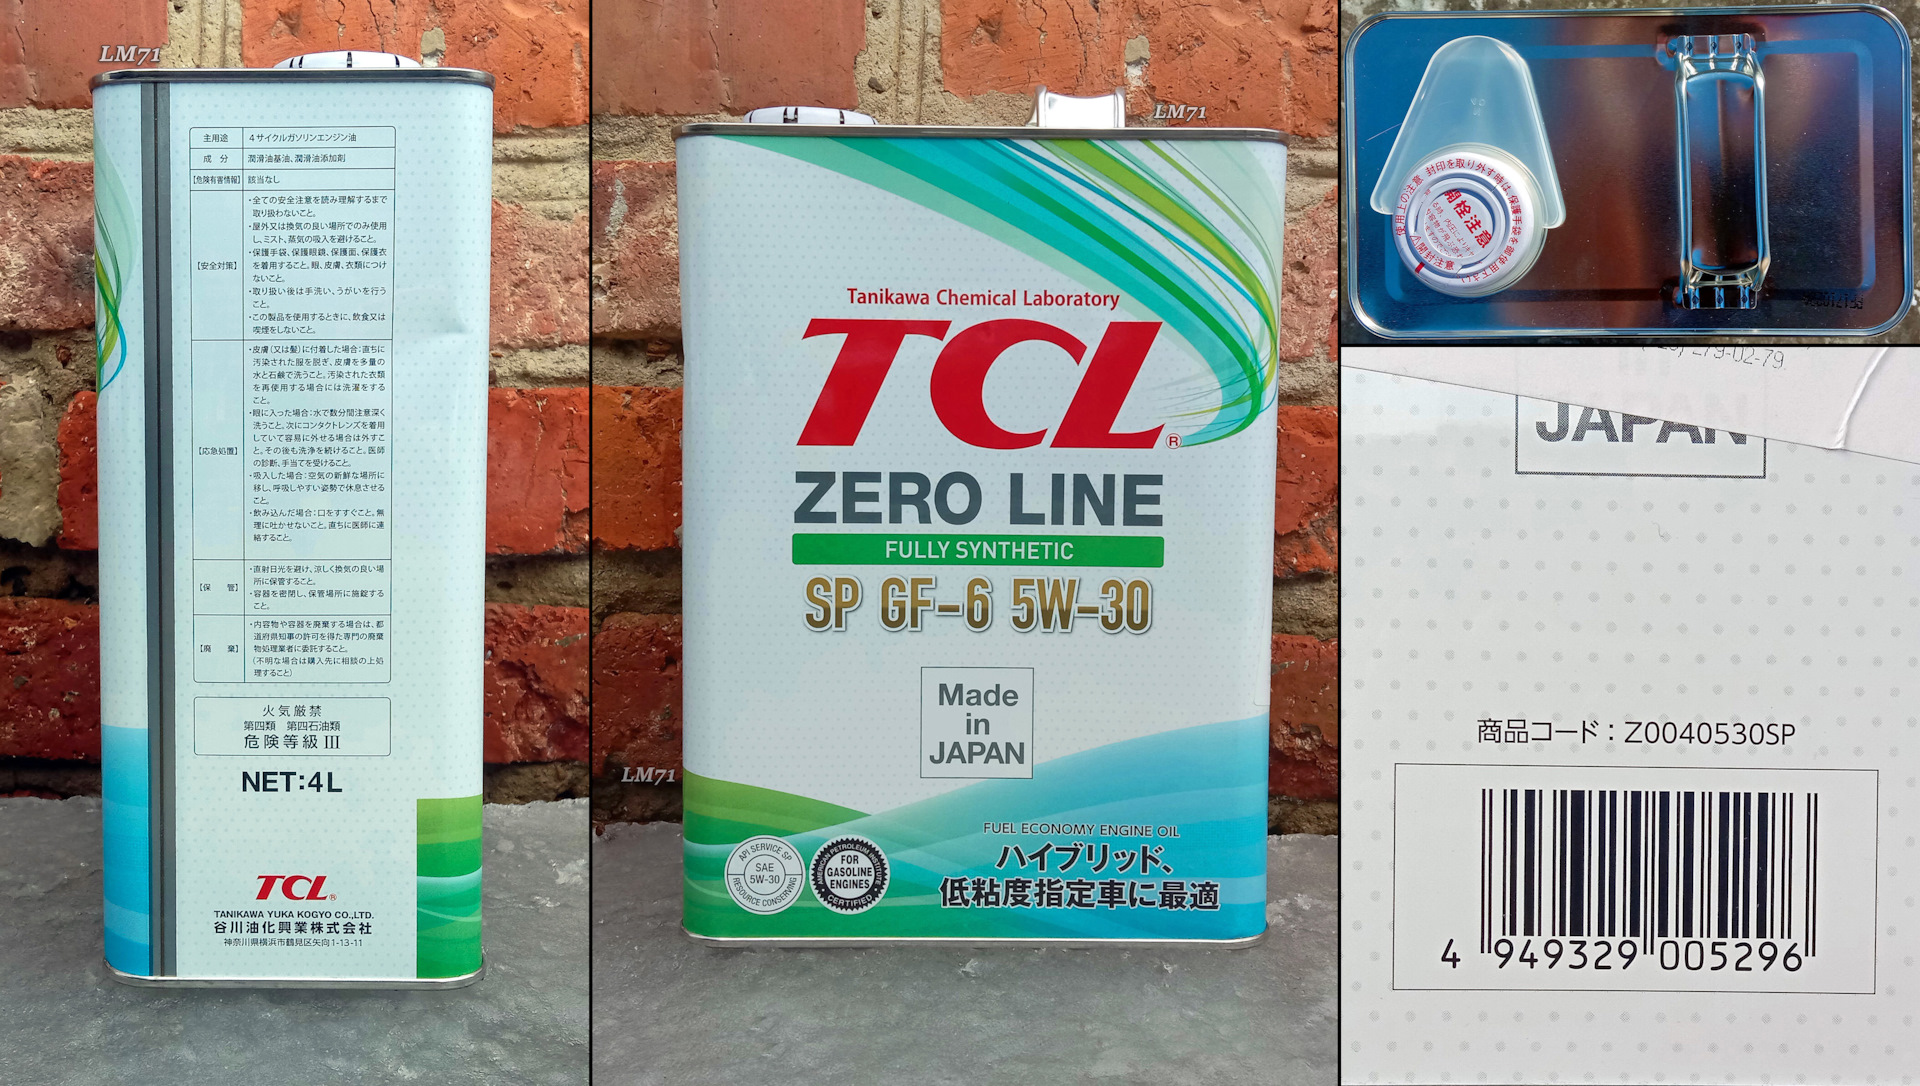 Моторное масло tcl 5w30. TCL Zero line 5w-30 SP, gf-6. TCL Zero line 5w30. TCL Zero 5w30. TCL 5w30 gf-6.